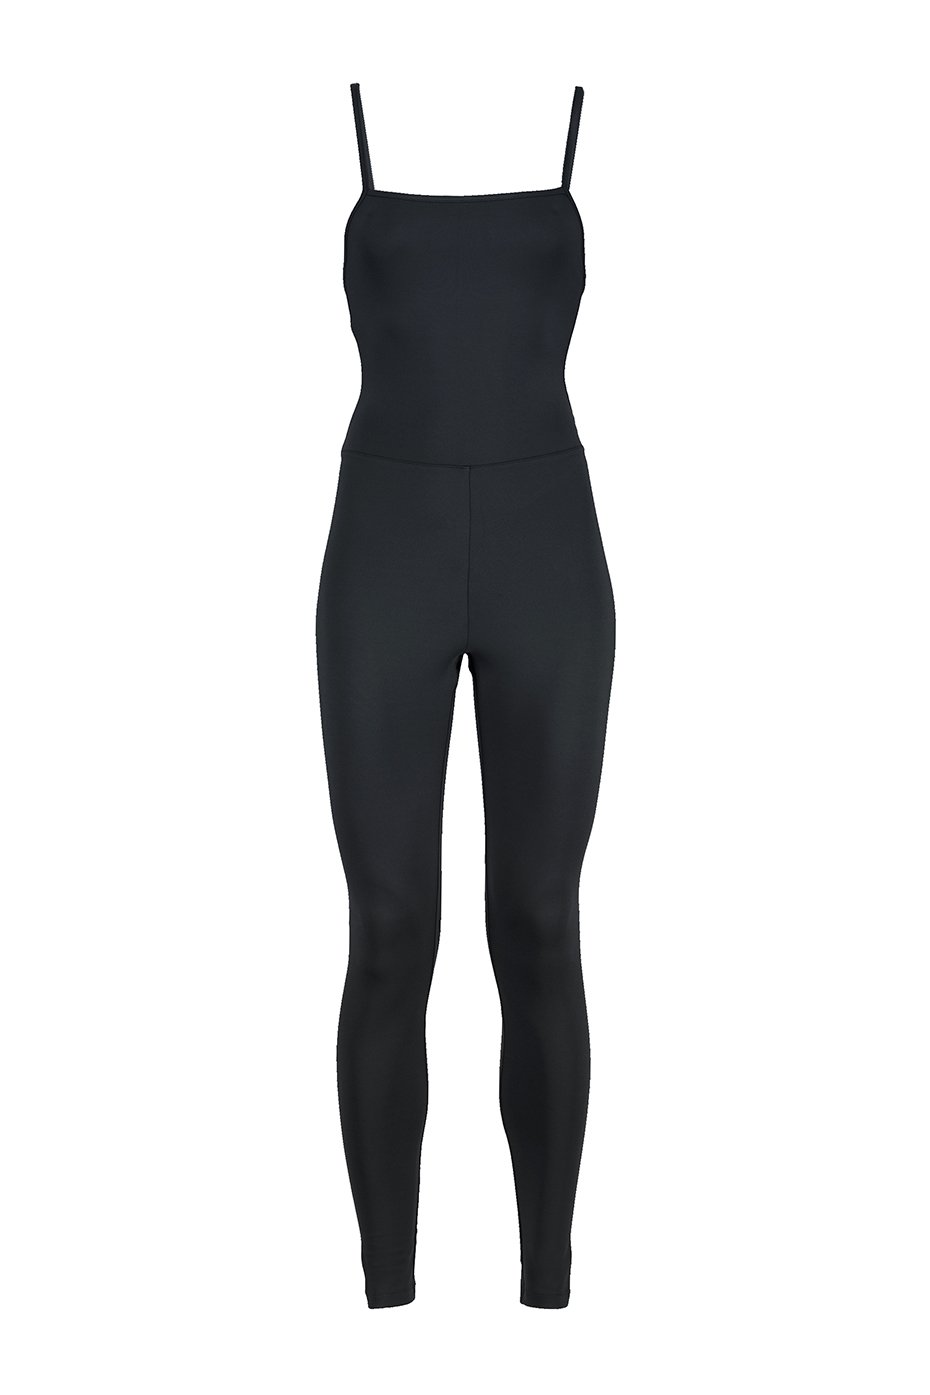 Girlfriend Collective Black The Unitard (More colours available)